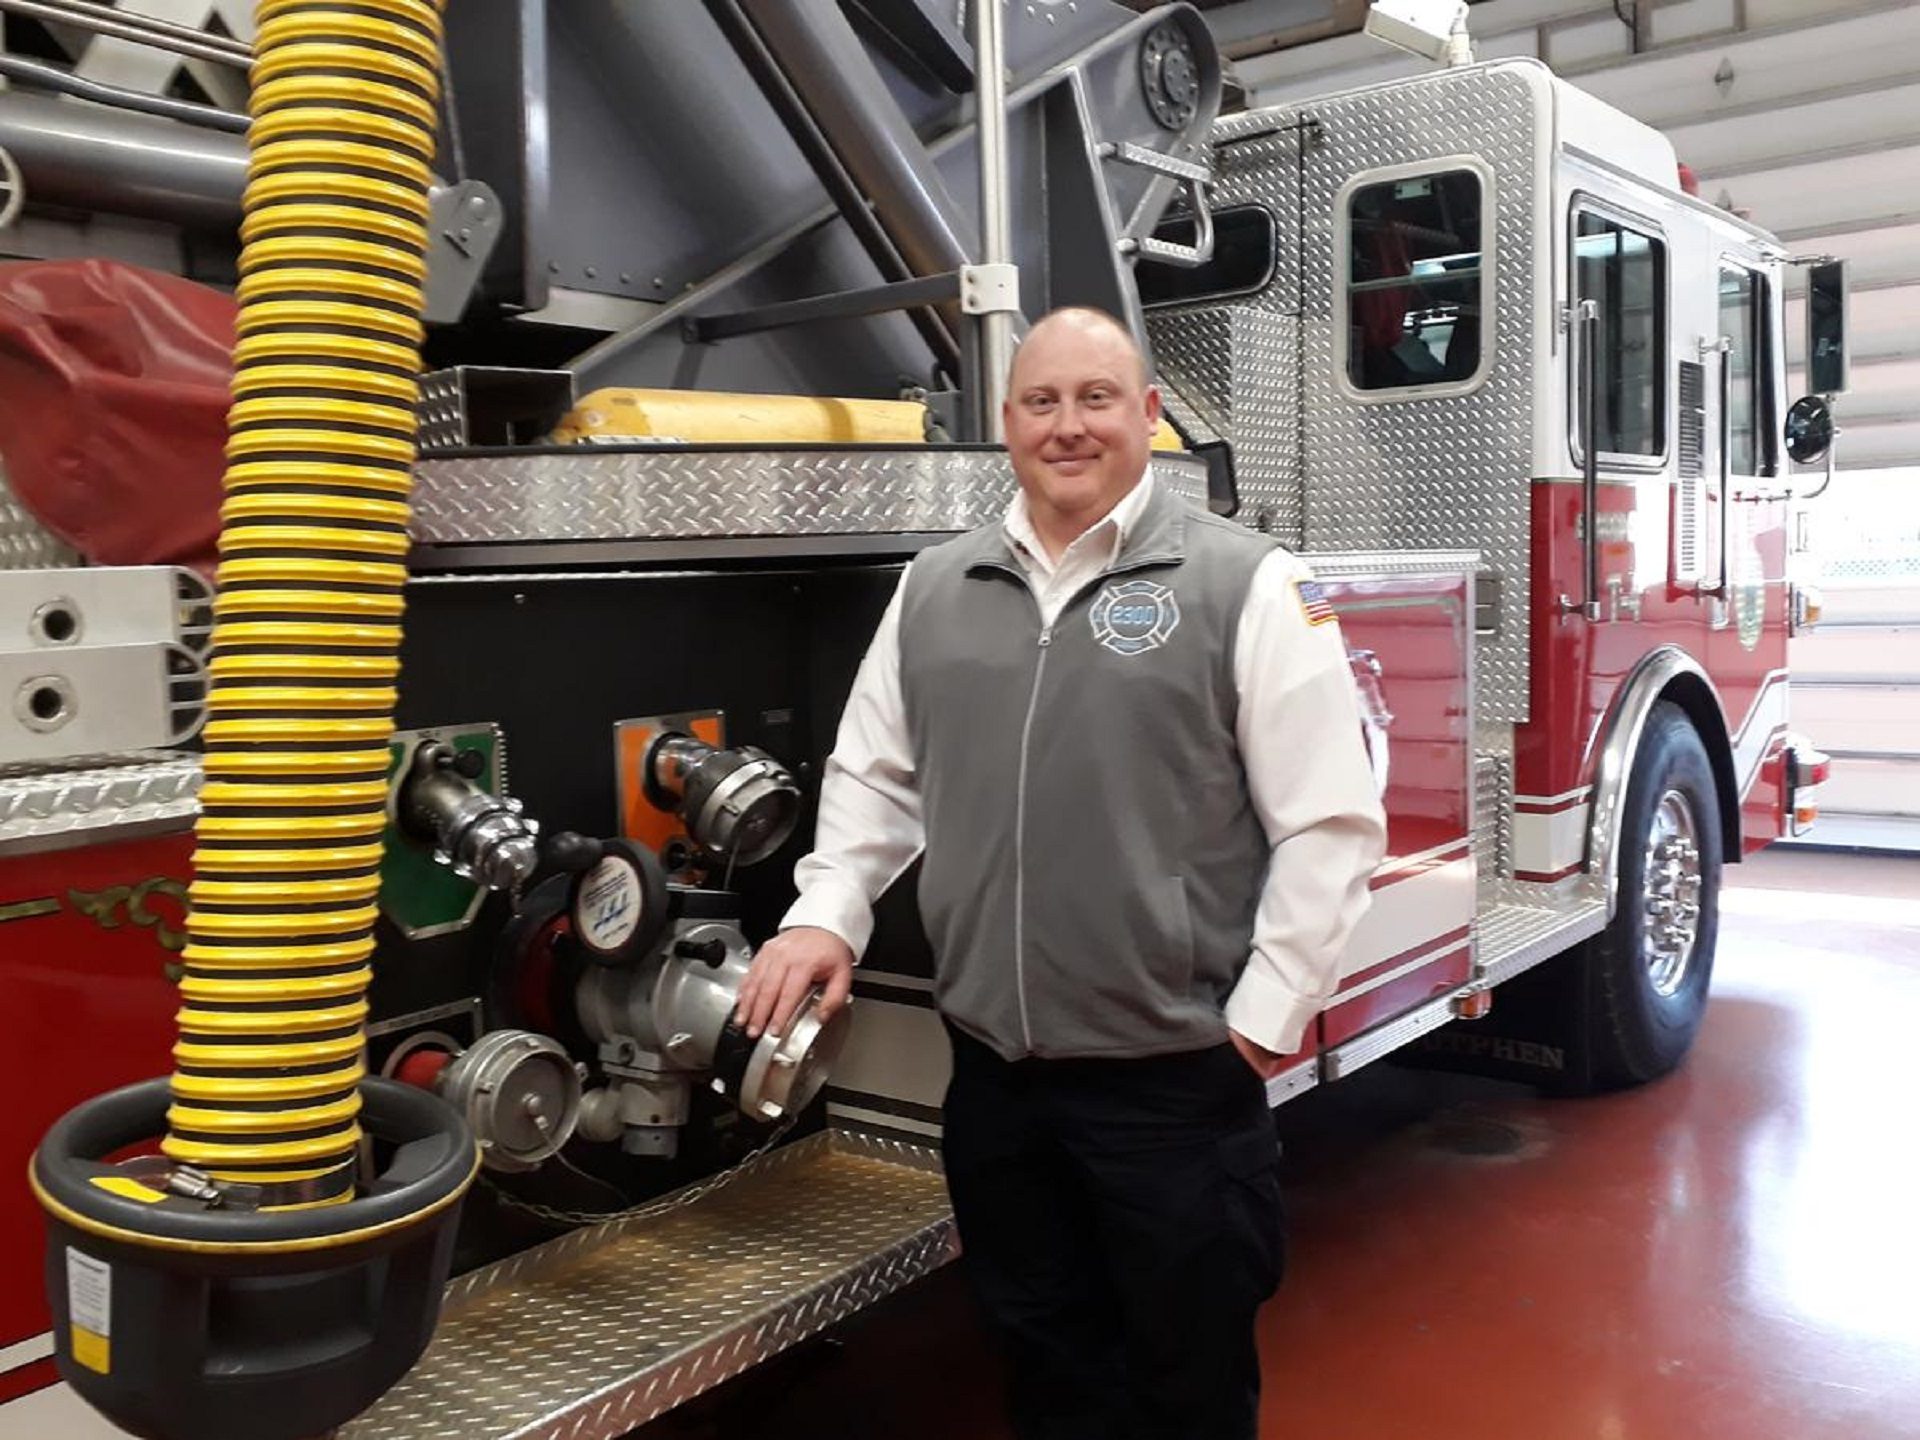 Rick Myers, chief of the Ellwood City Fire Department, says that he's concerned how the borough losing its only hospital will impact emergency medical services.